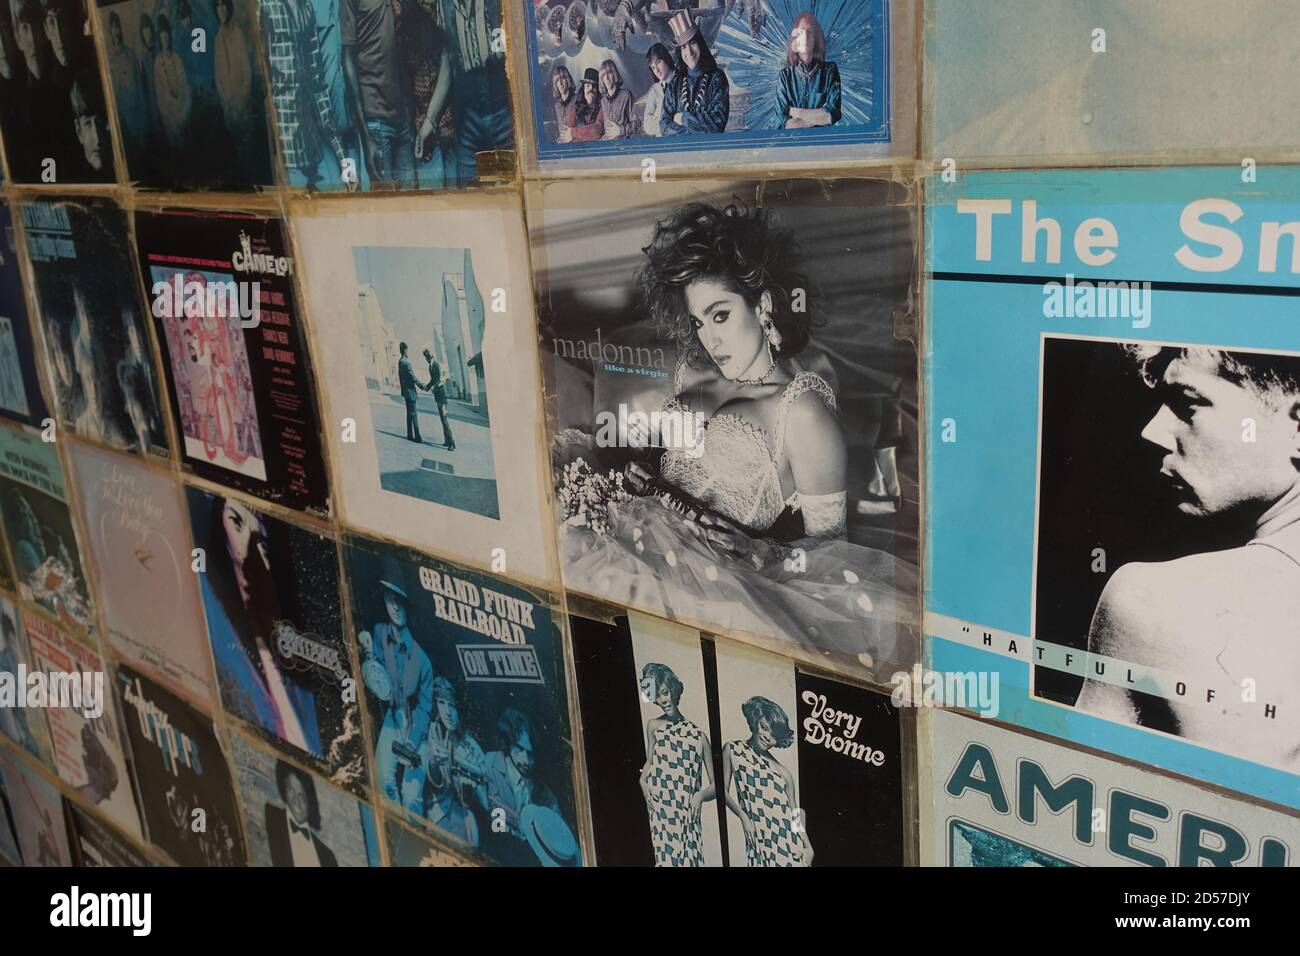 Athens, Greece - August 7, 2019: Wall with vintage pop rock music vinyl record albums from the 1970s and 1980s. Stock Photo